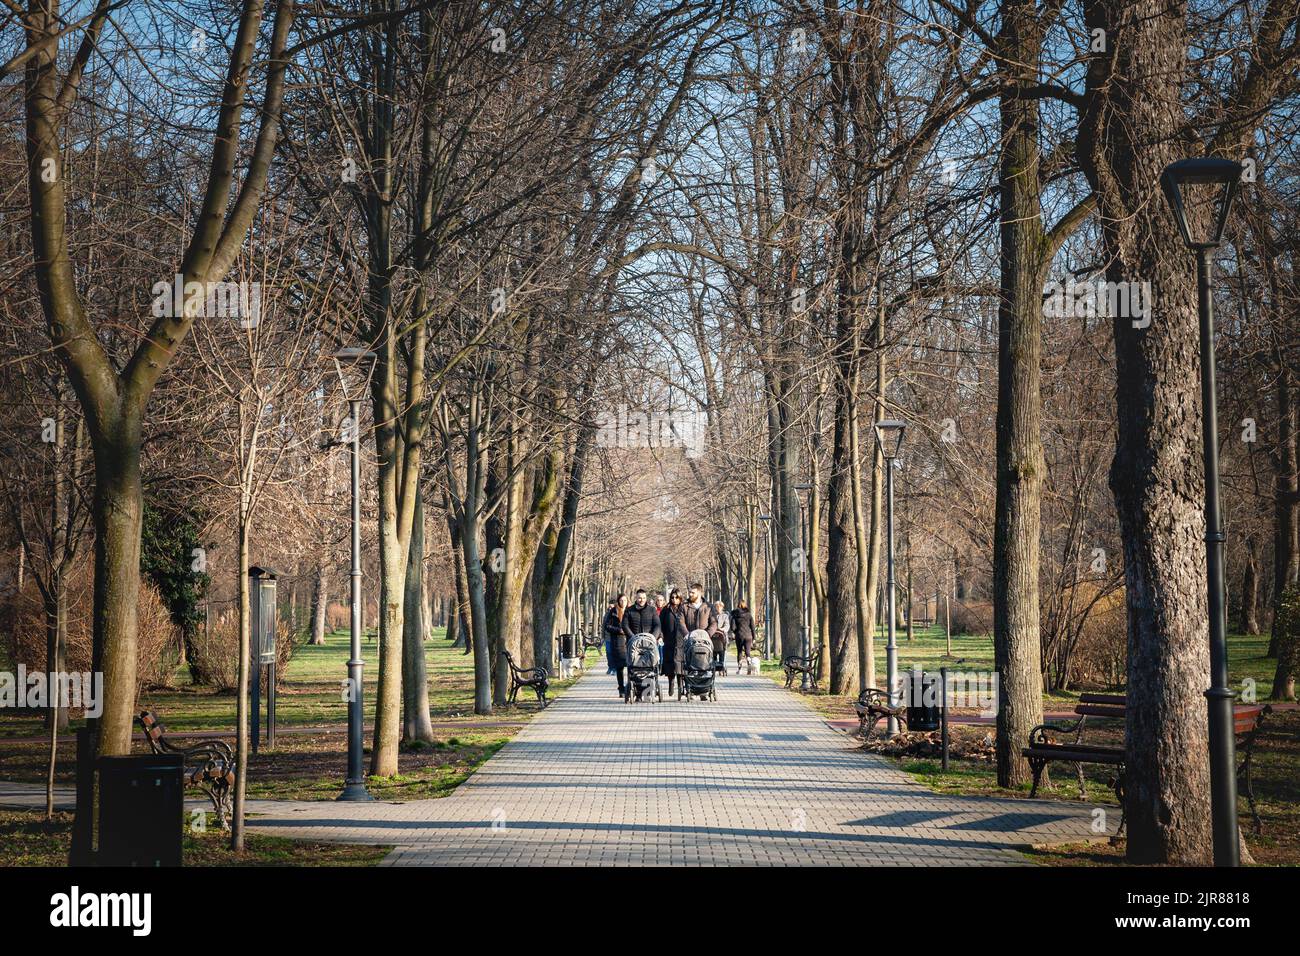 Picture of the gradski park, the city park of Pancevo, in Vojvodina, Serbia, with a serbian young family, two fathers, and babies in a stroller, walki Stock Photo